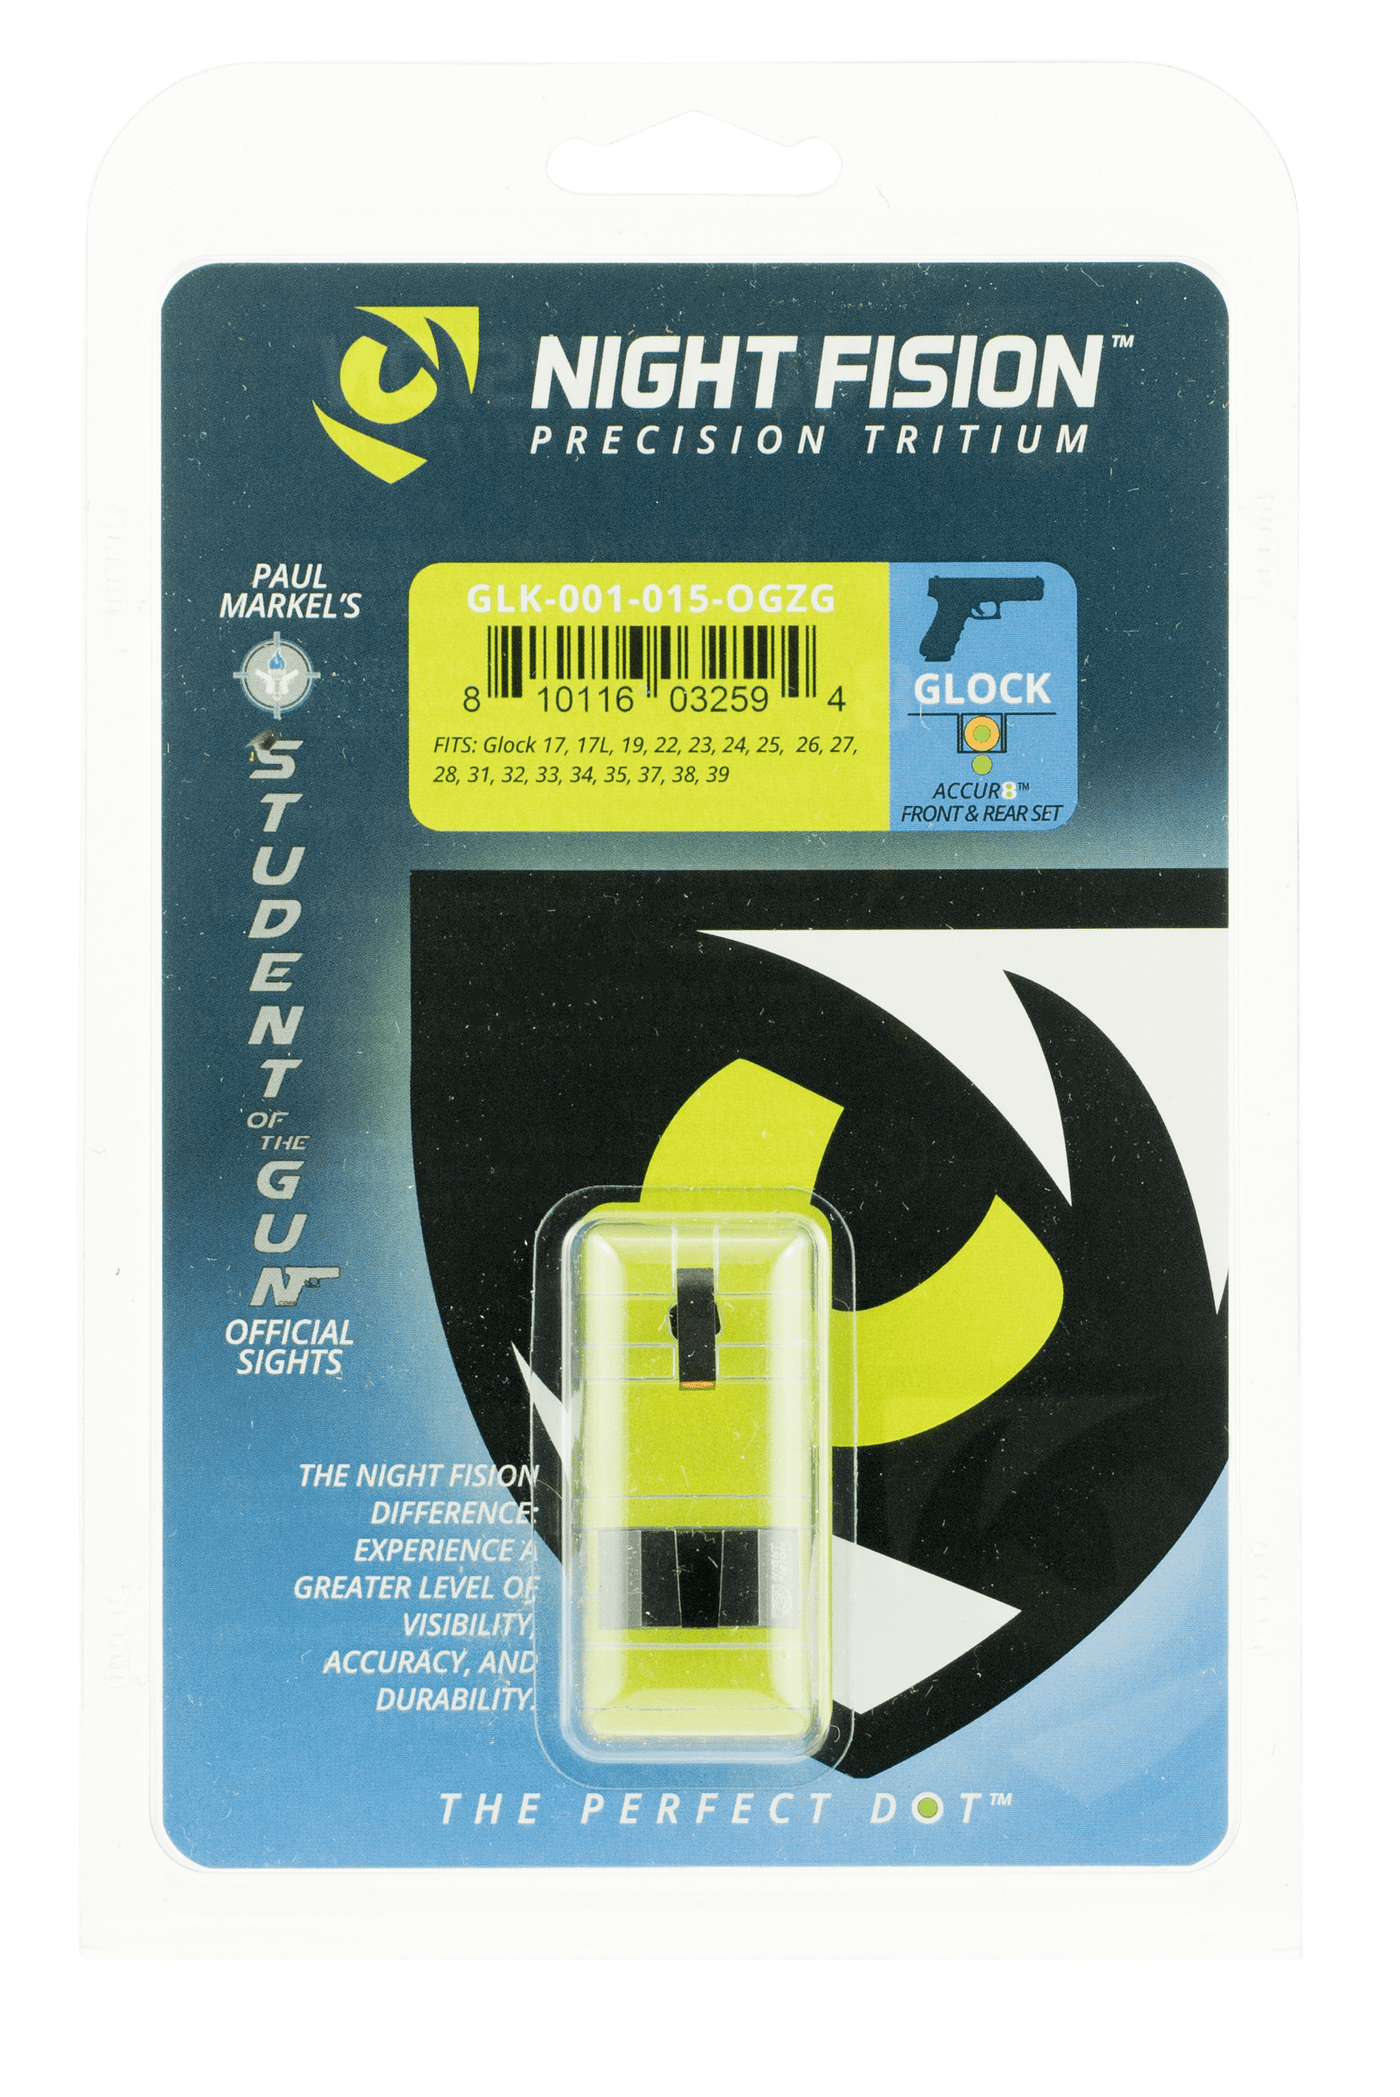 Night Fision Night Fision Perfect Dot, Nf Glk-001-015-ogzg     Ns Glk 17/19 Square Accur8 Firearm Accessories